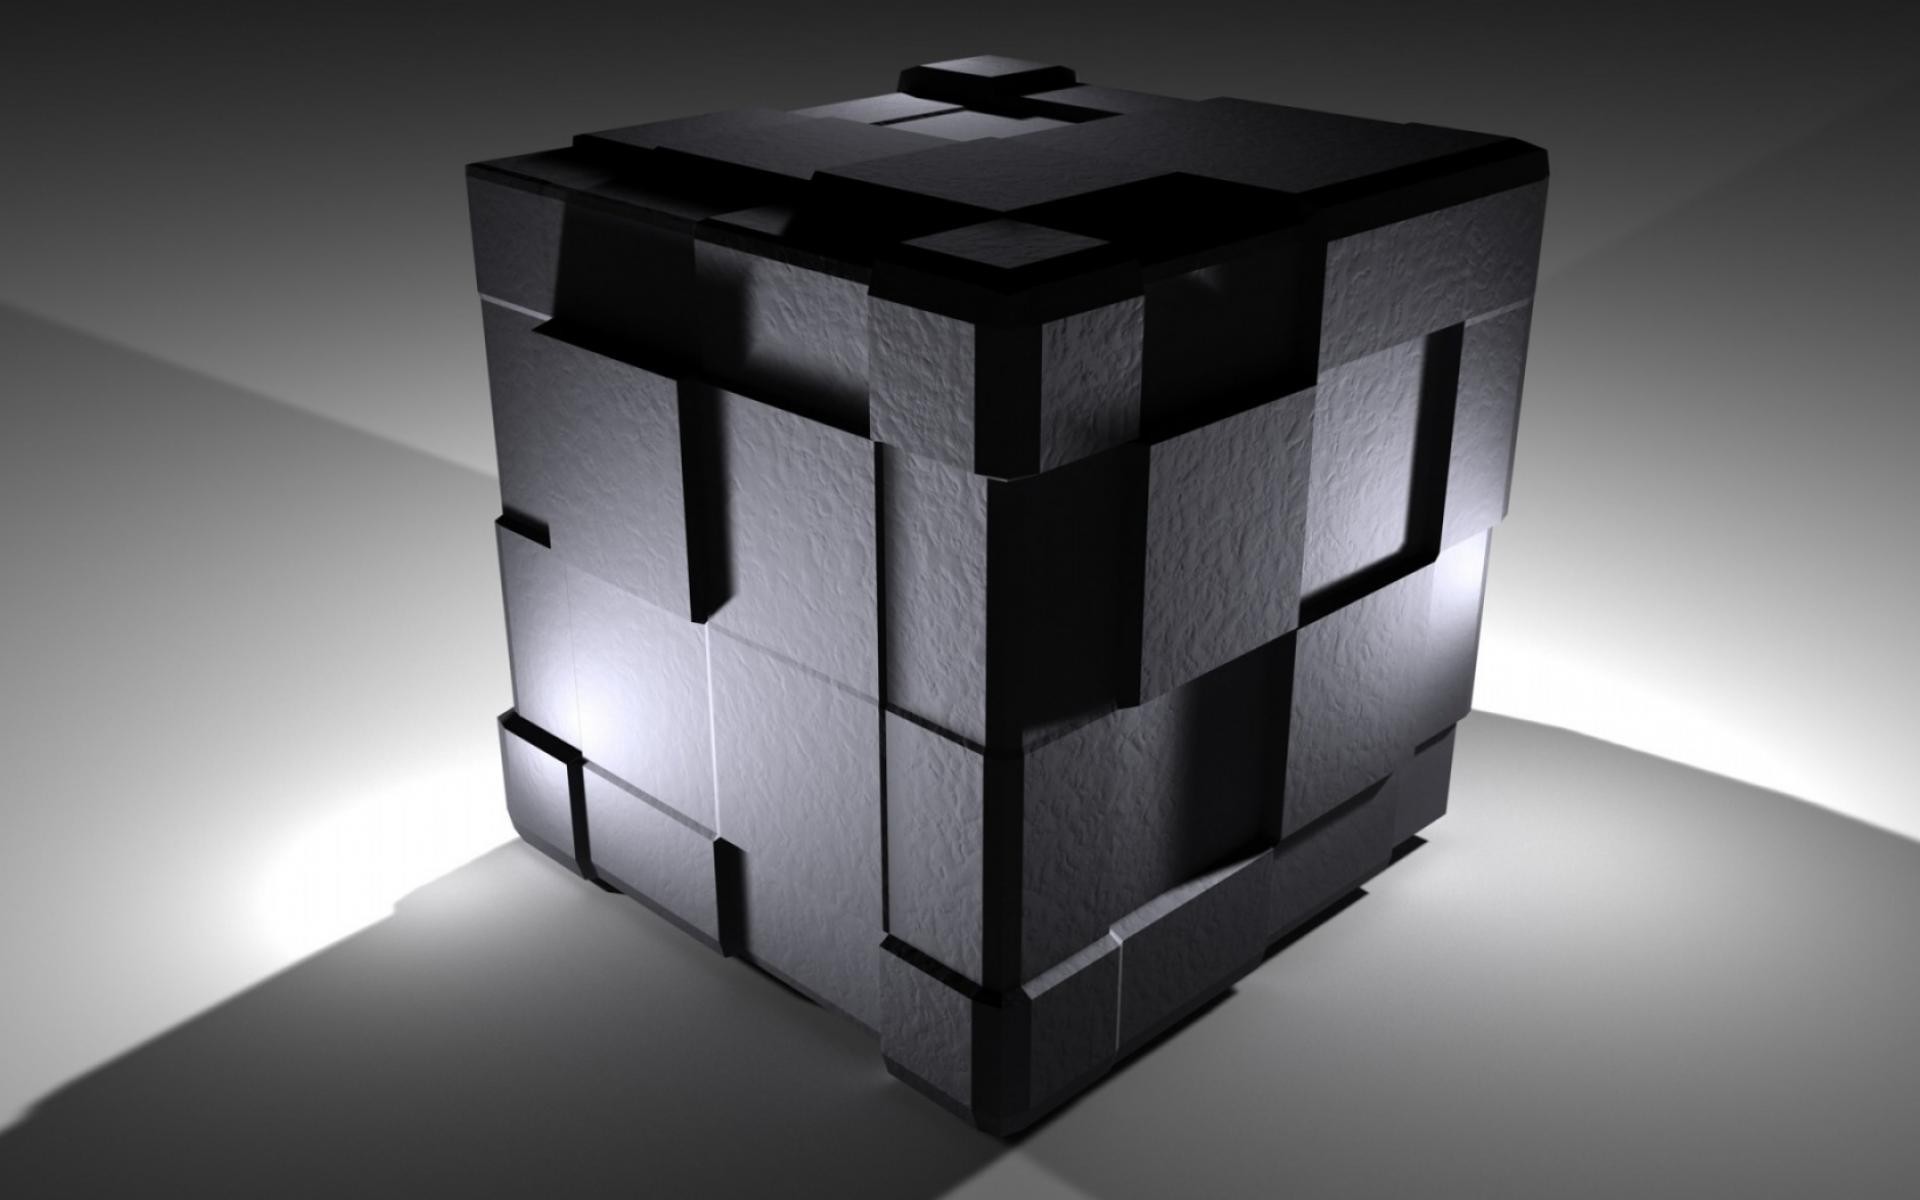 General 1920x1200 3D Blocks digital art CGI simple background gray background 3D Abstract cube